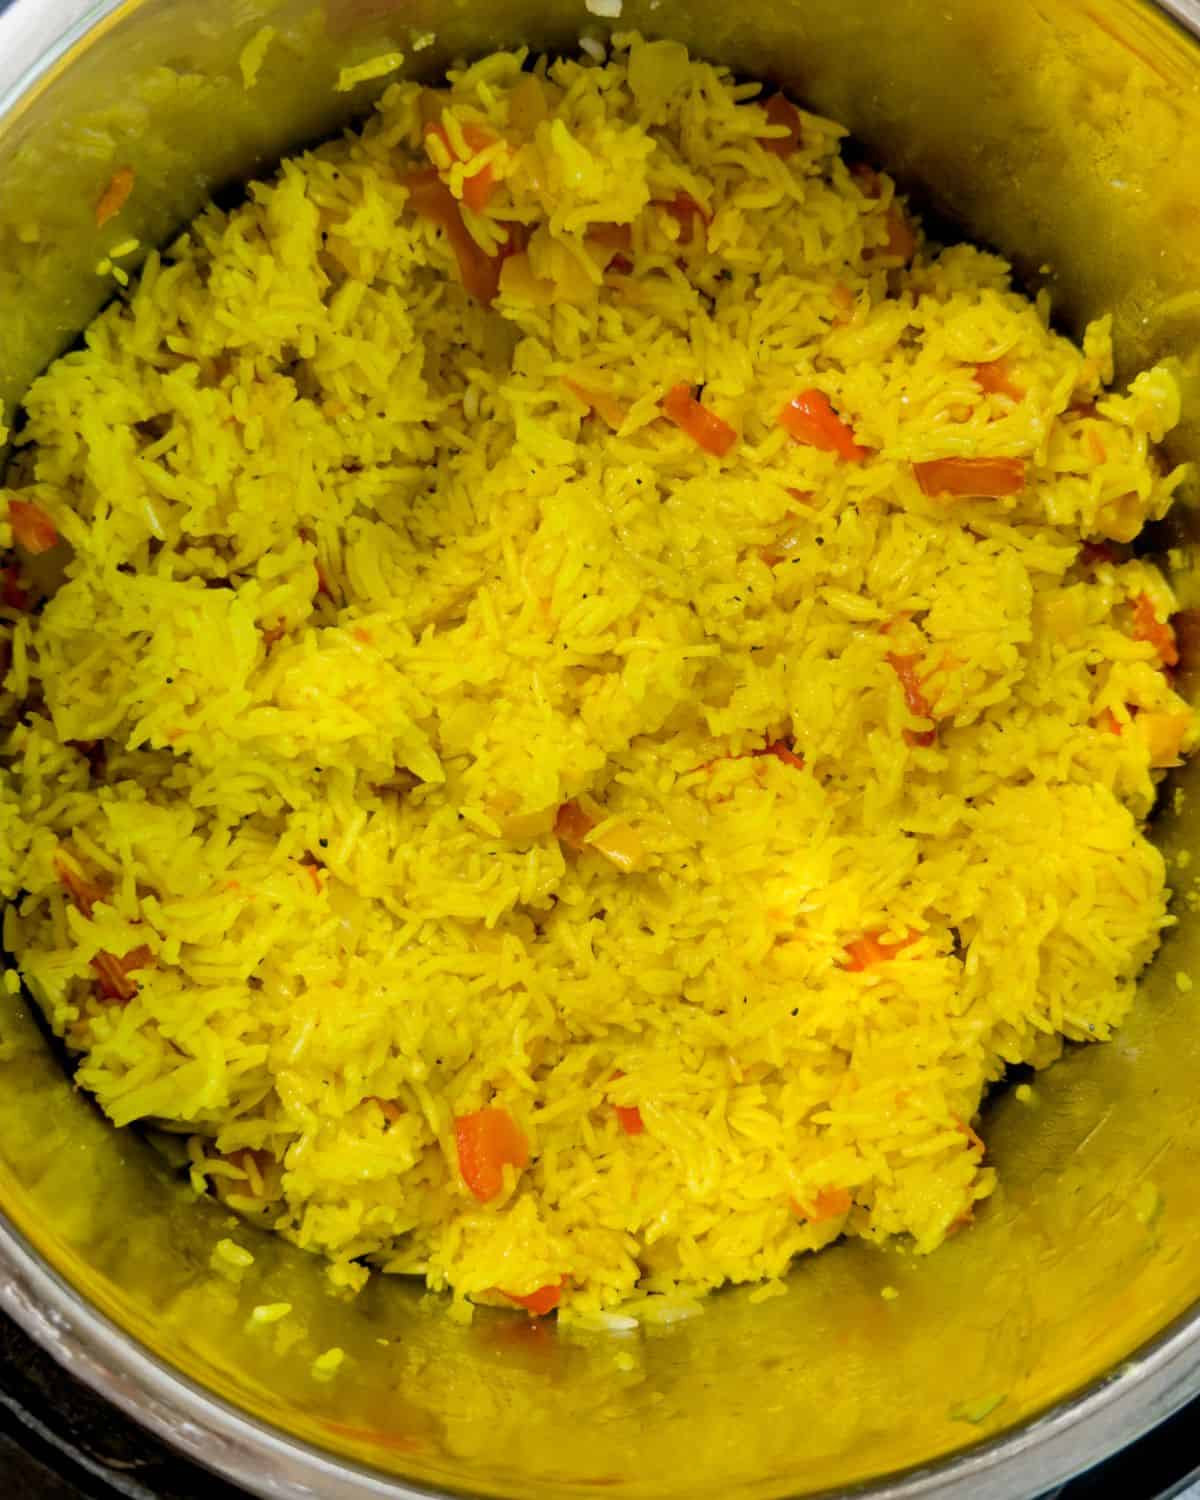 Fluffy, yellow saffron rice in an Instant Pot, hinting at the fragrant spices used in its preparation.